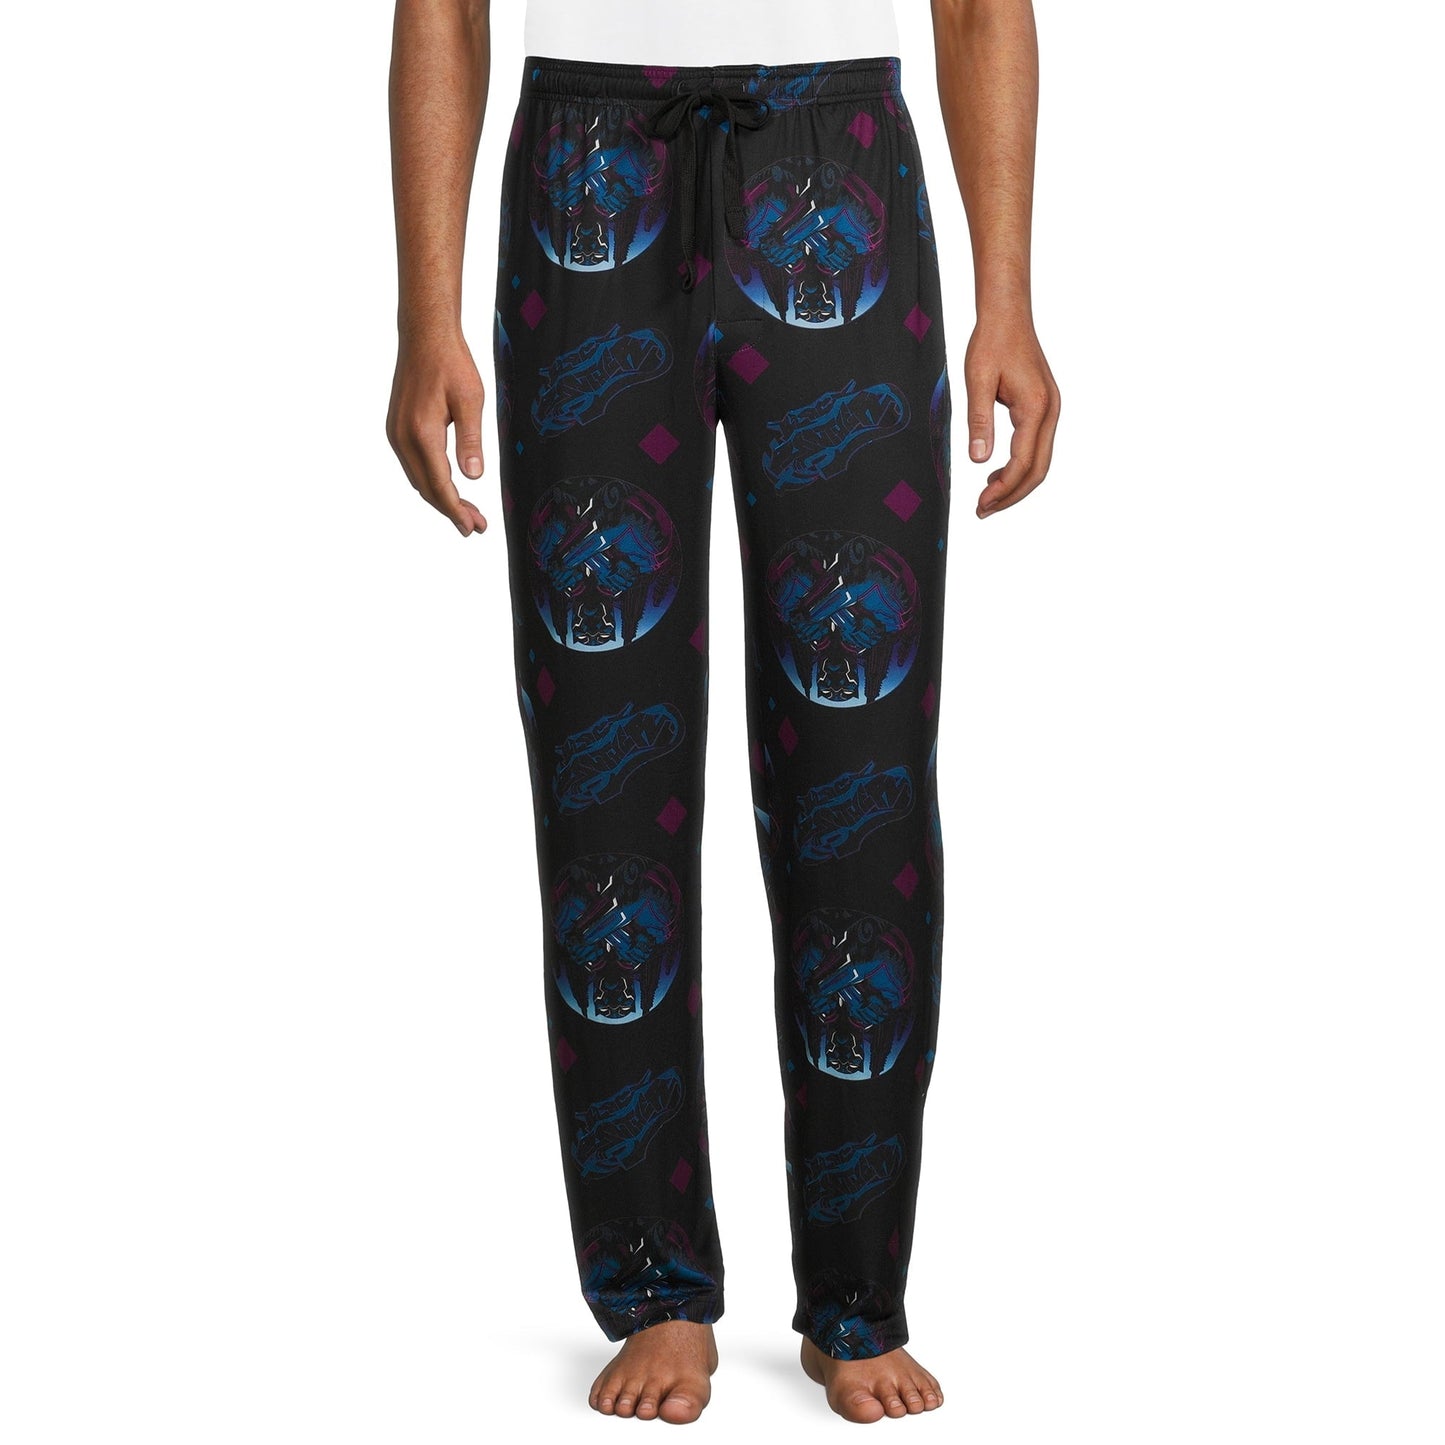 Black Panther Adult Men's All Over Print Sleep Pants Multicolor